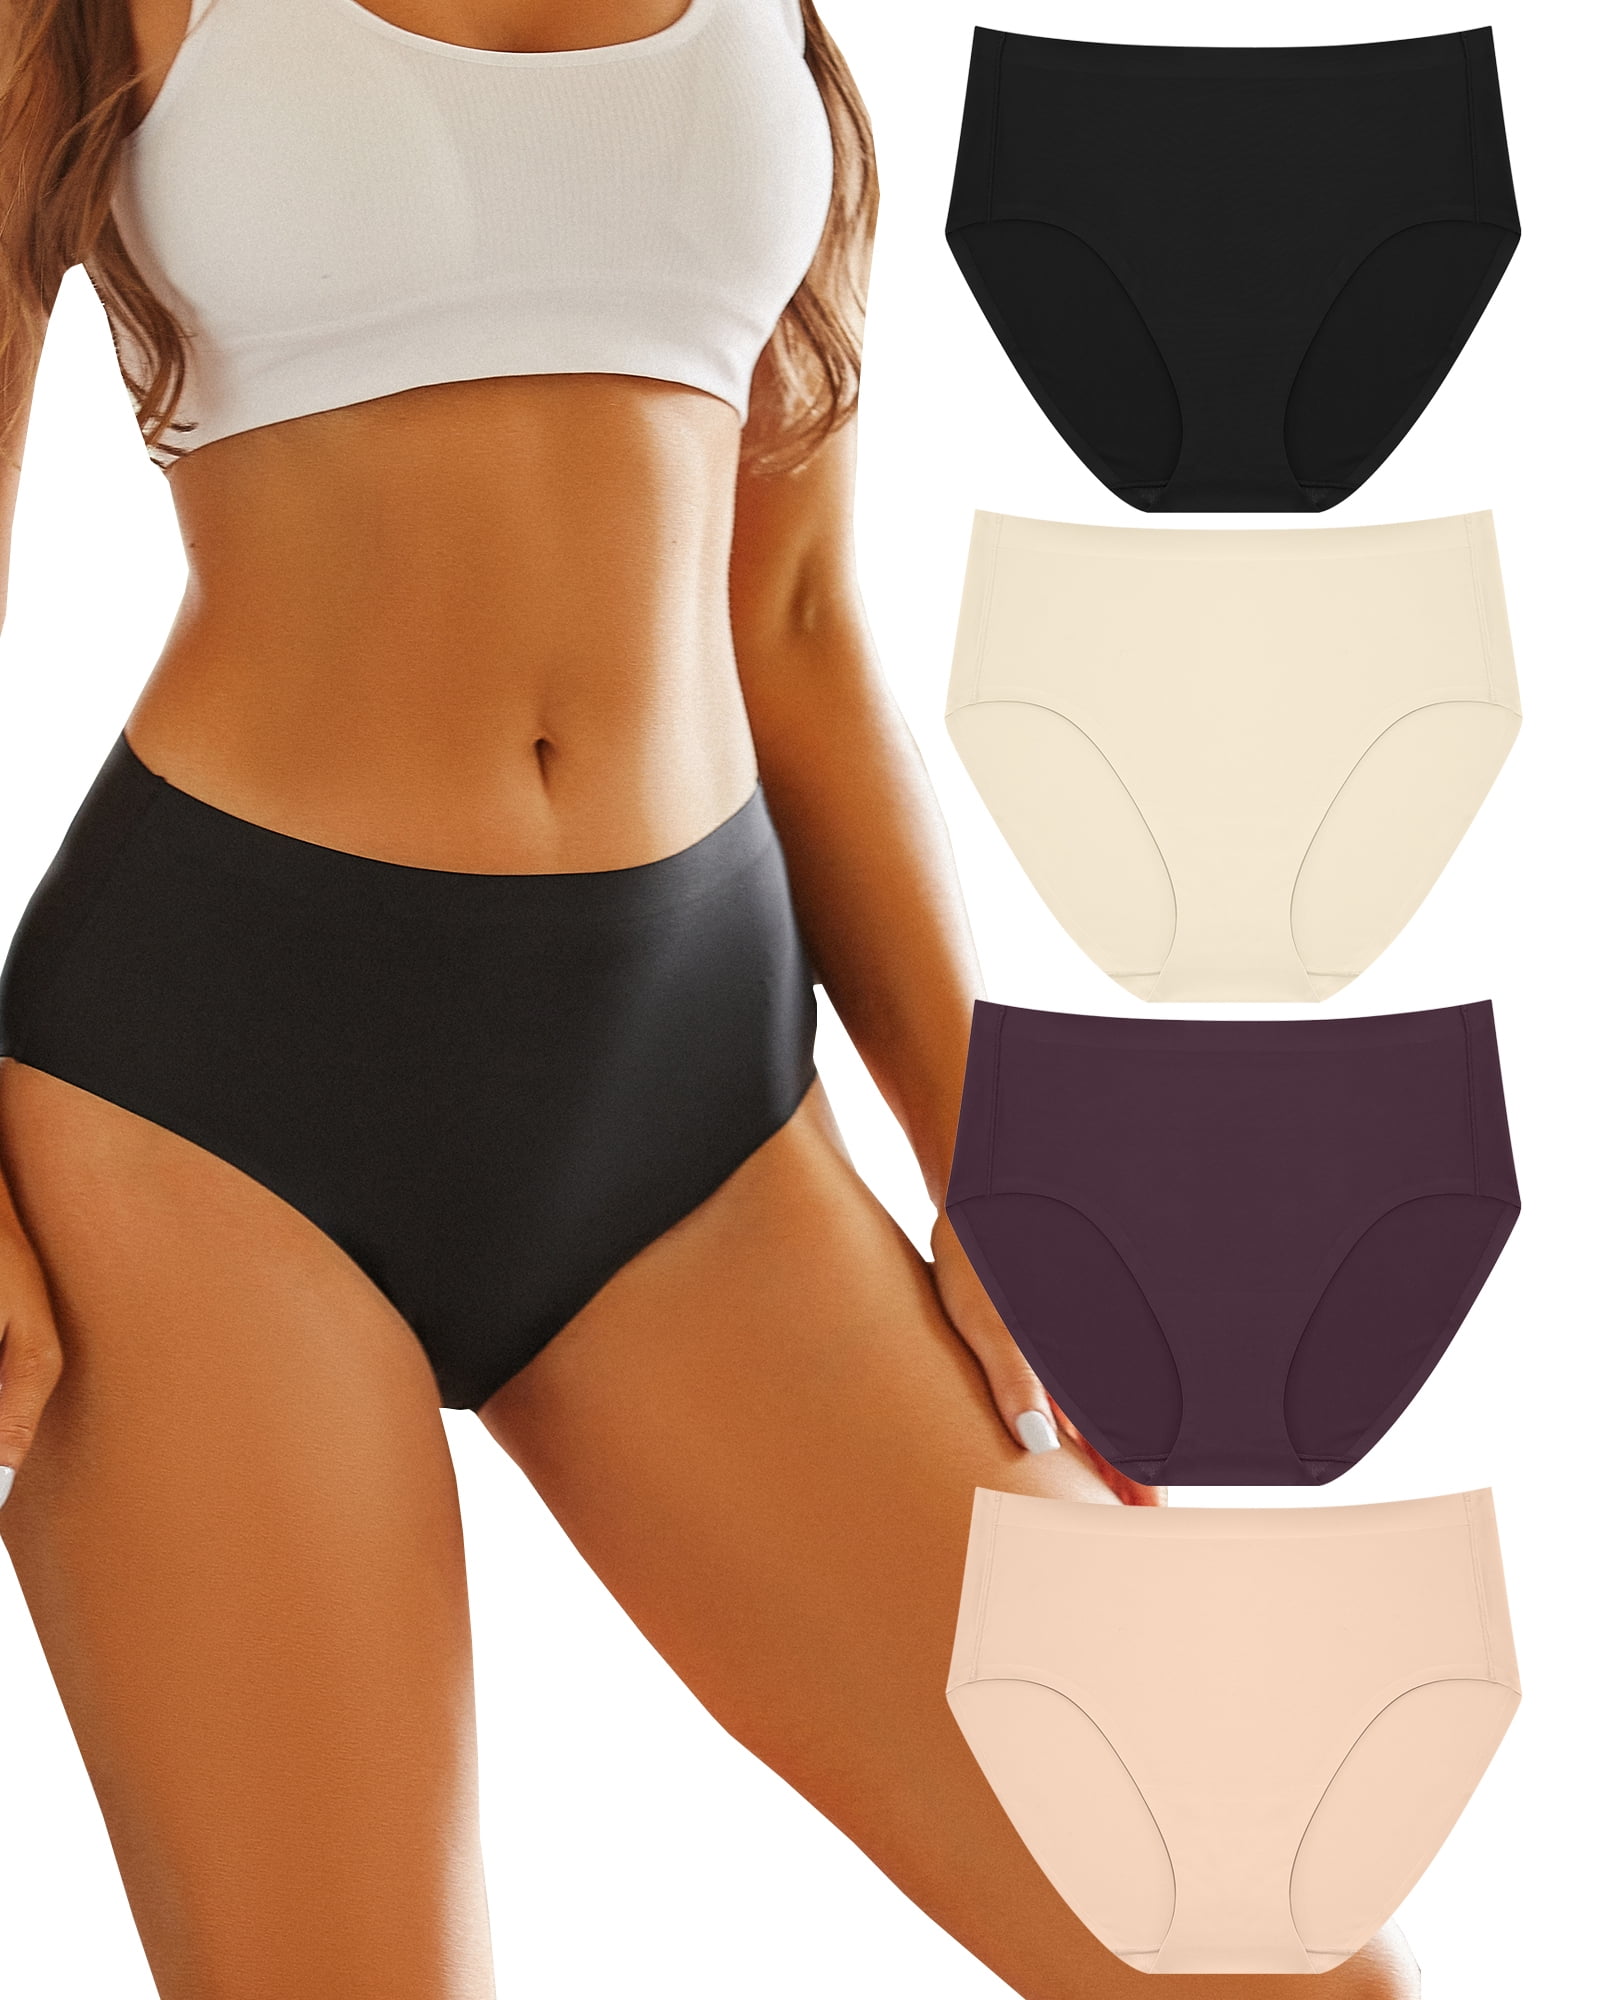 Finetoo 2 Pack High Waisted Underwear for Women Tummy Control